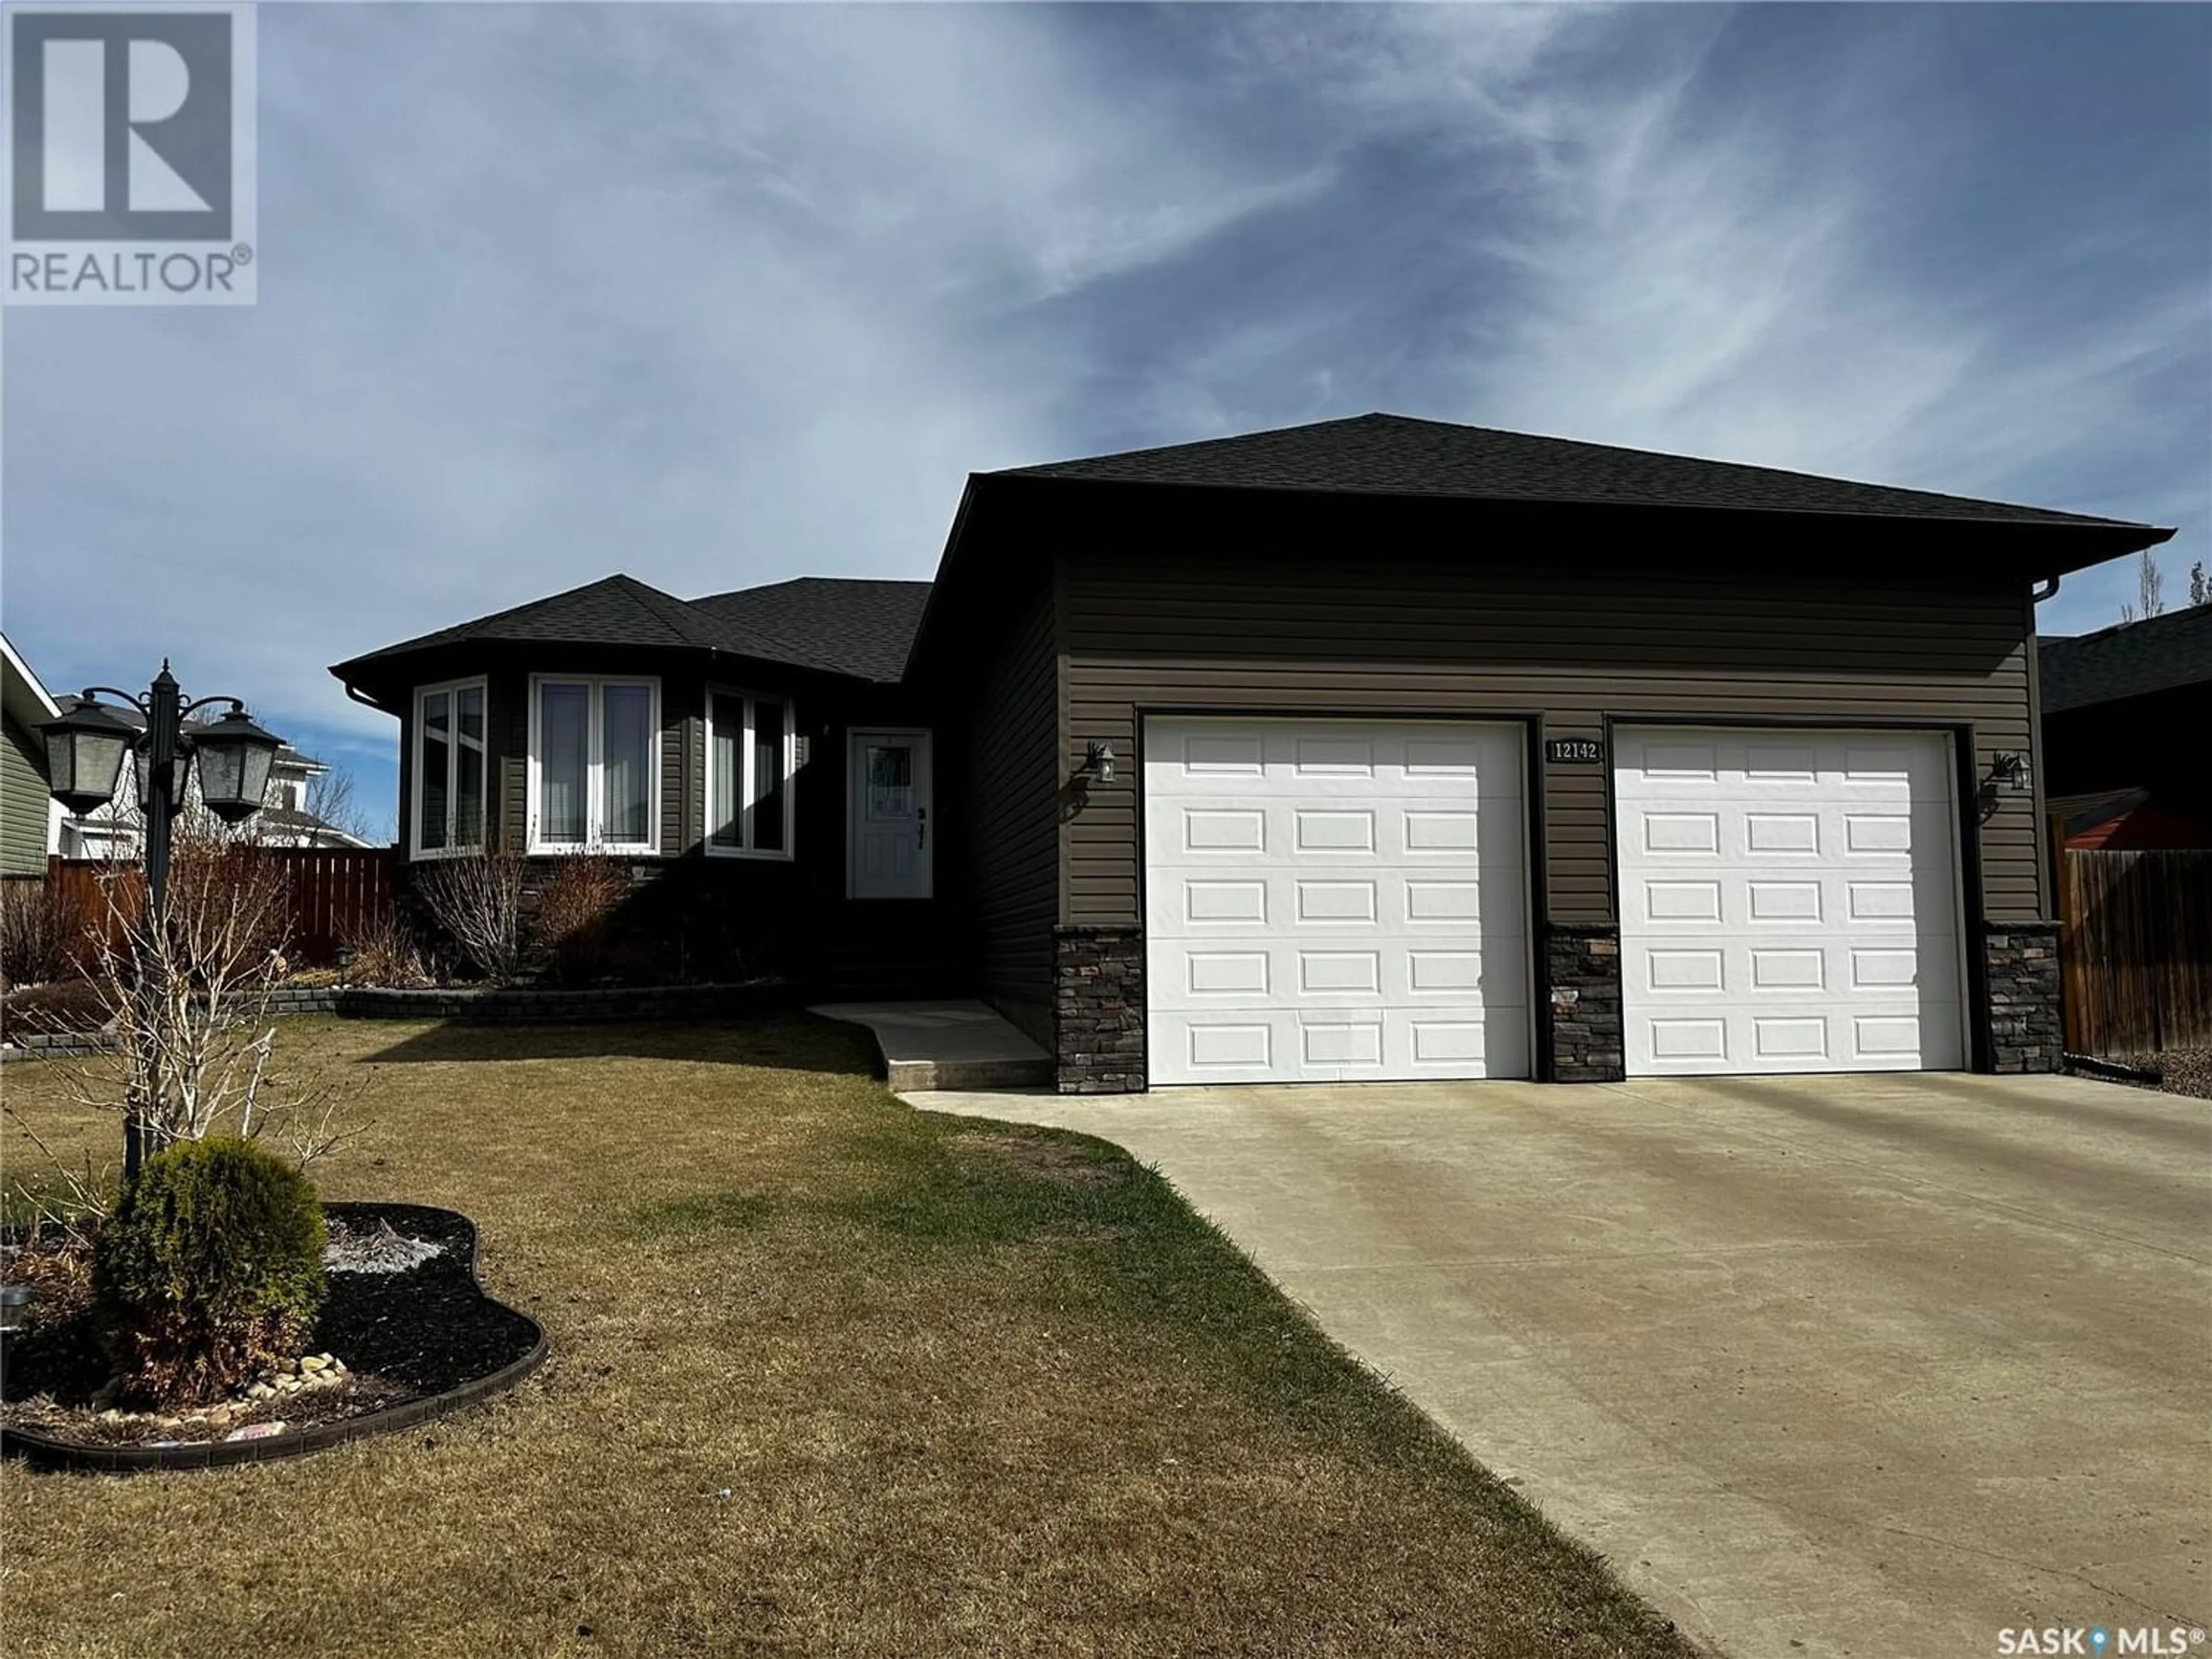 Home with stucco exterior material for 12142 Battle Springs DRIVE, Battleford Saskatchewan S0M0E0